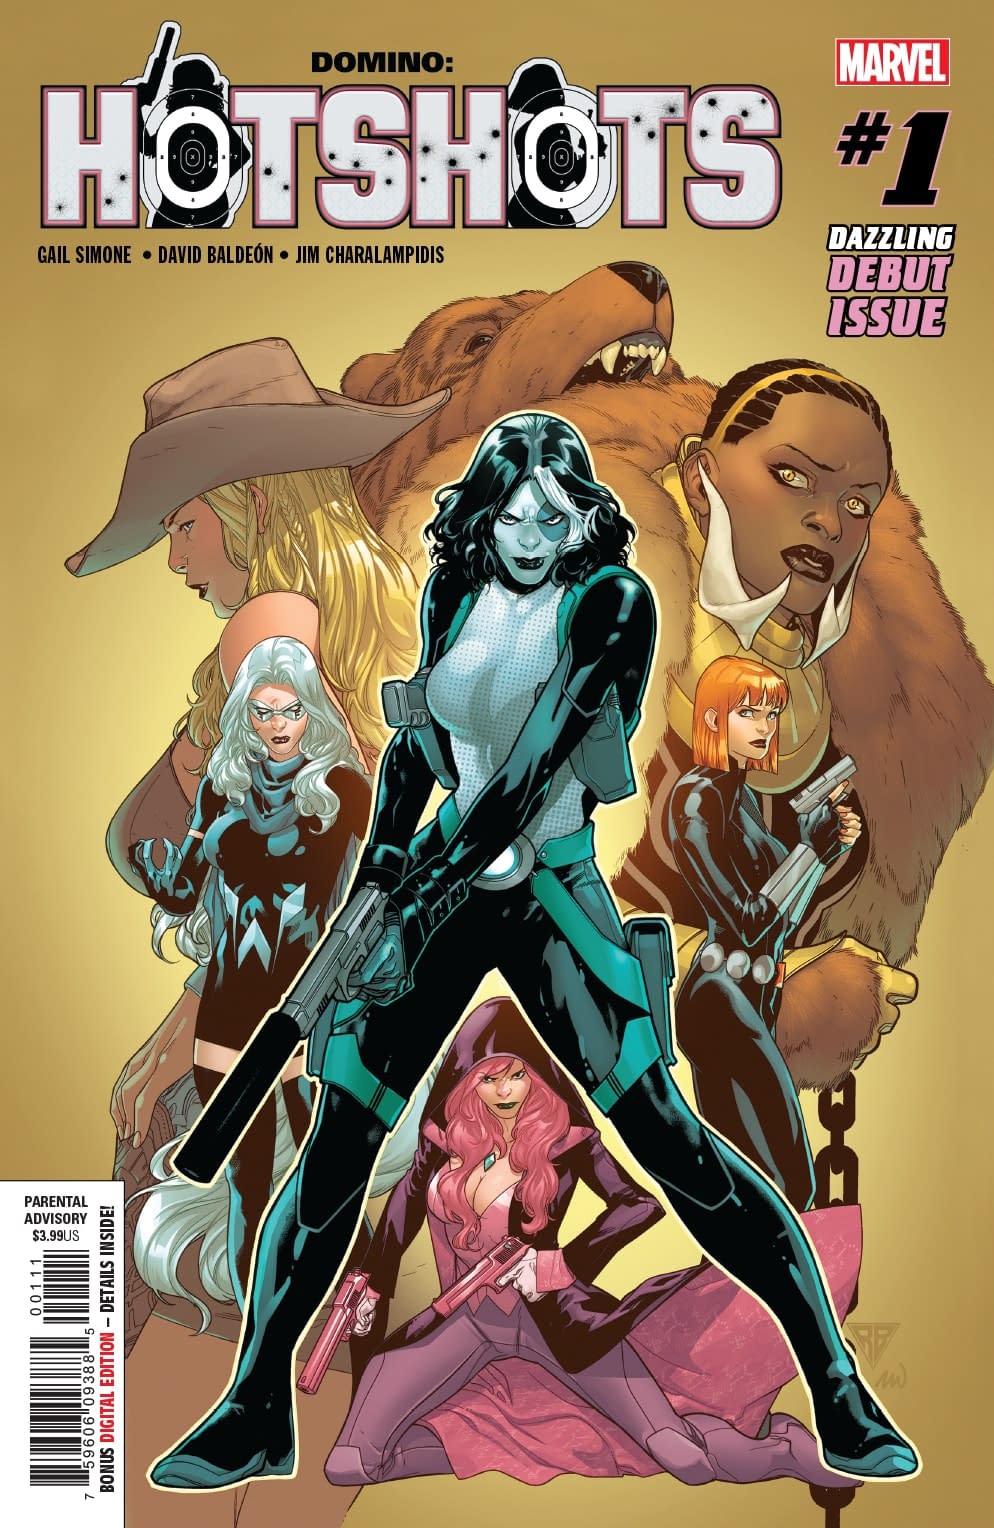 Gail Simone Says We Could Get More Domino After Hotshots, the "Most Efffed Up Thing" She's Ever Written